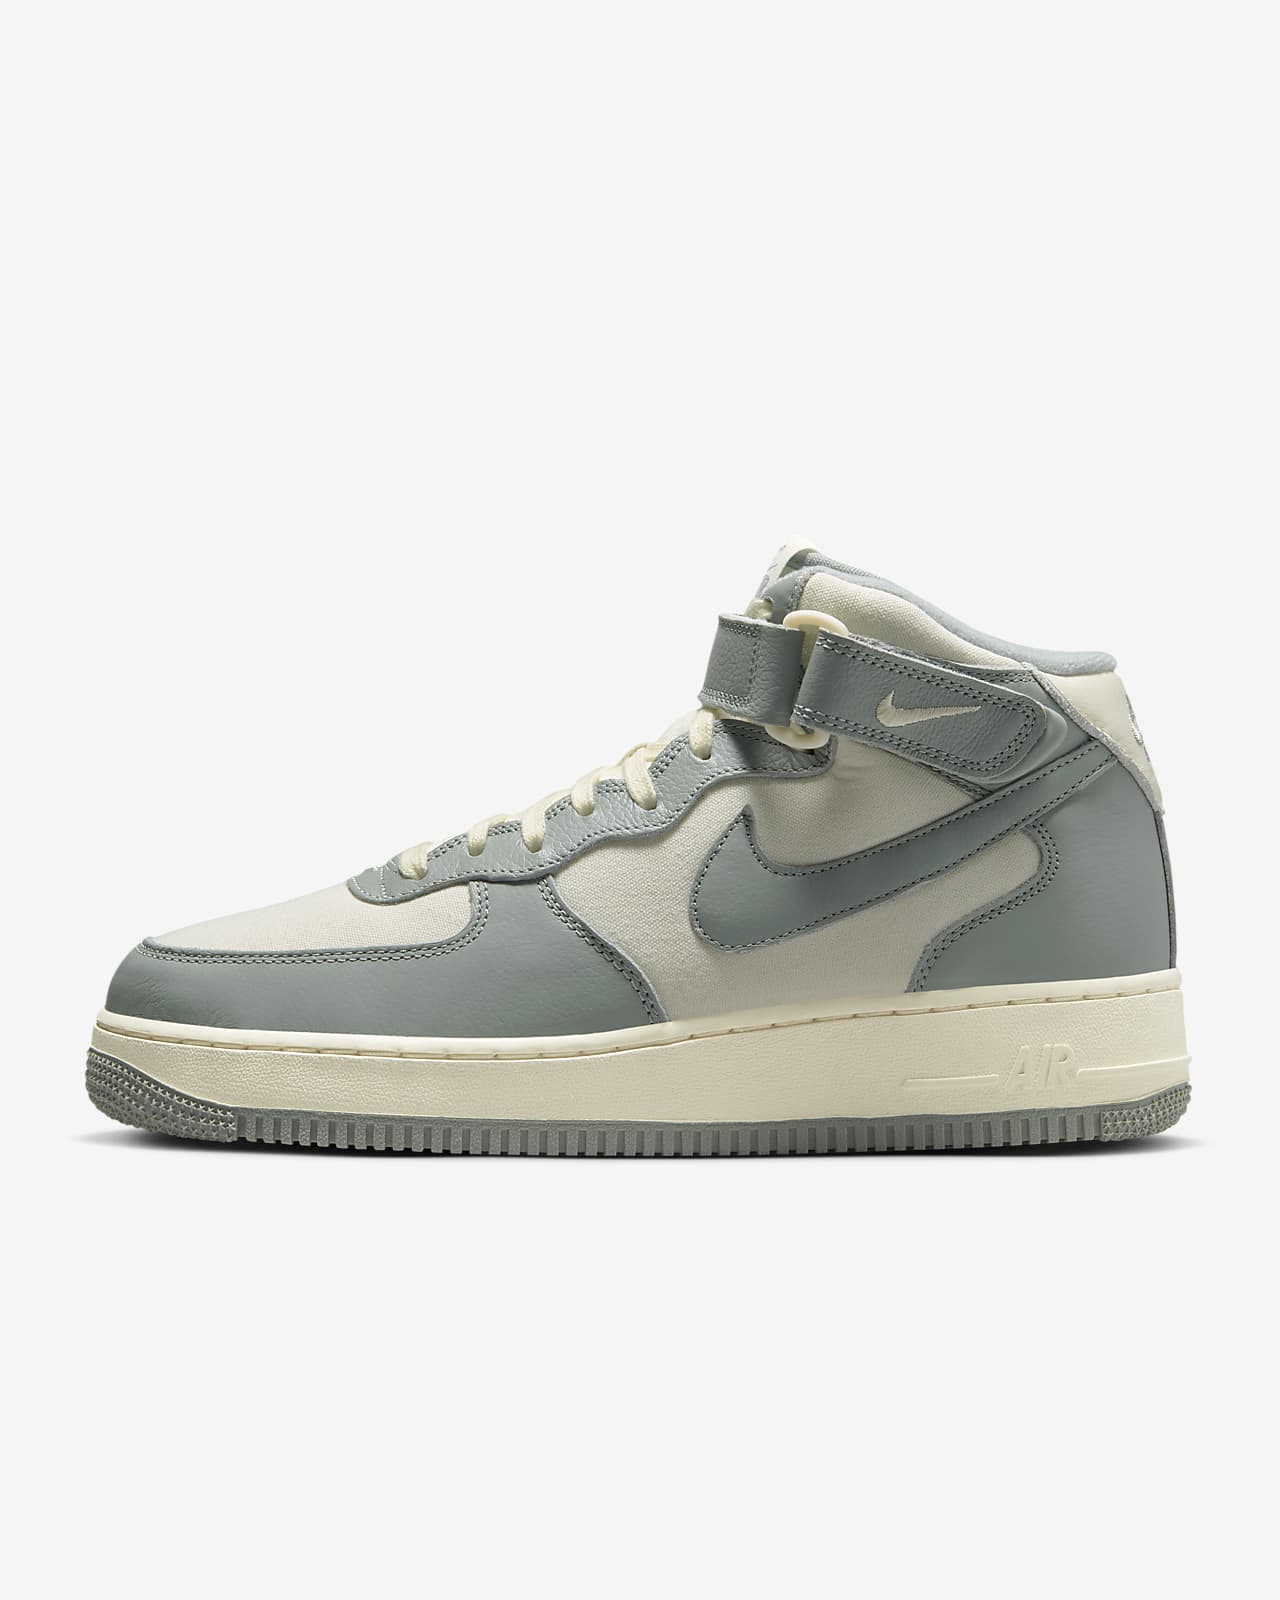 Nike Air Force 1 Mid 07 LX NBHD Mens Shoes Review